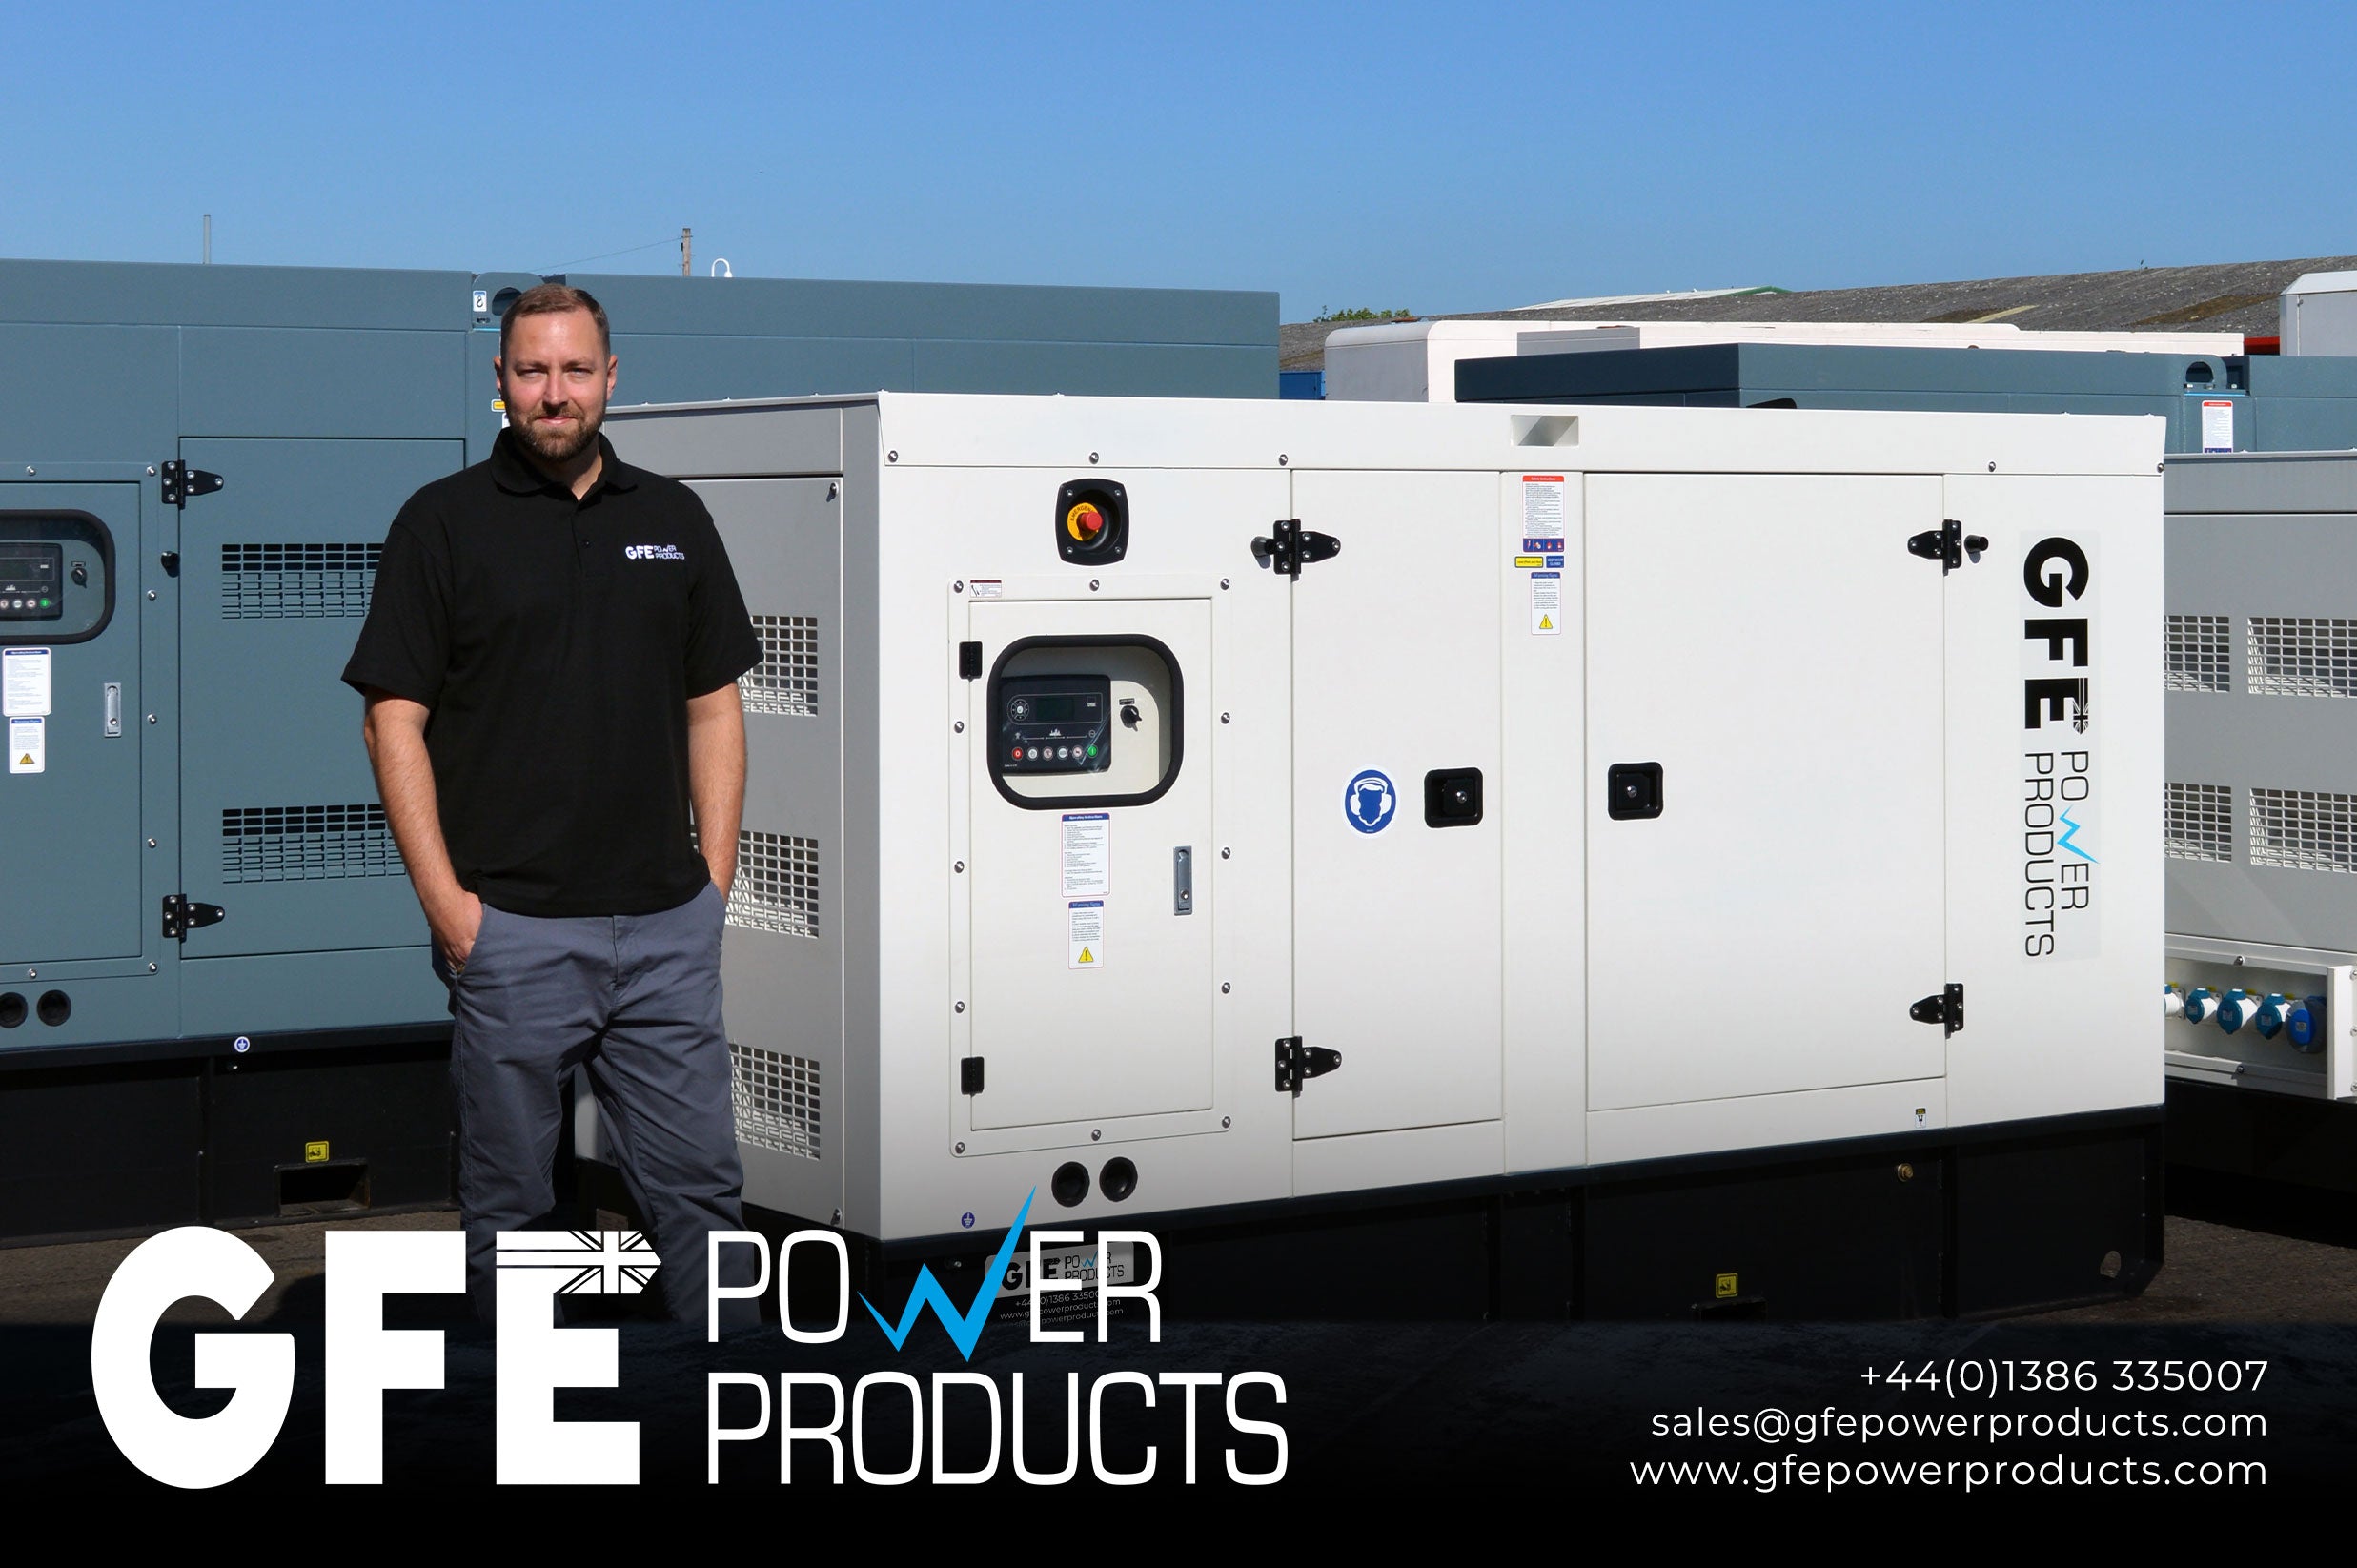 Sales Director Joins GFE Power Products